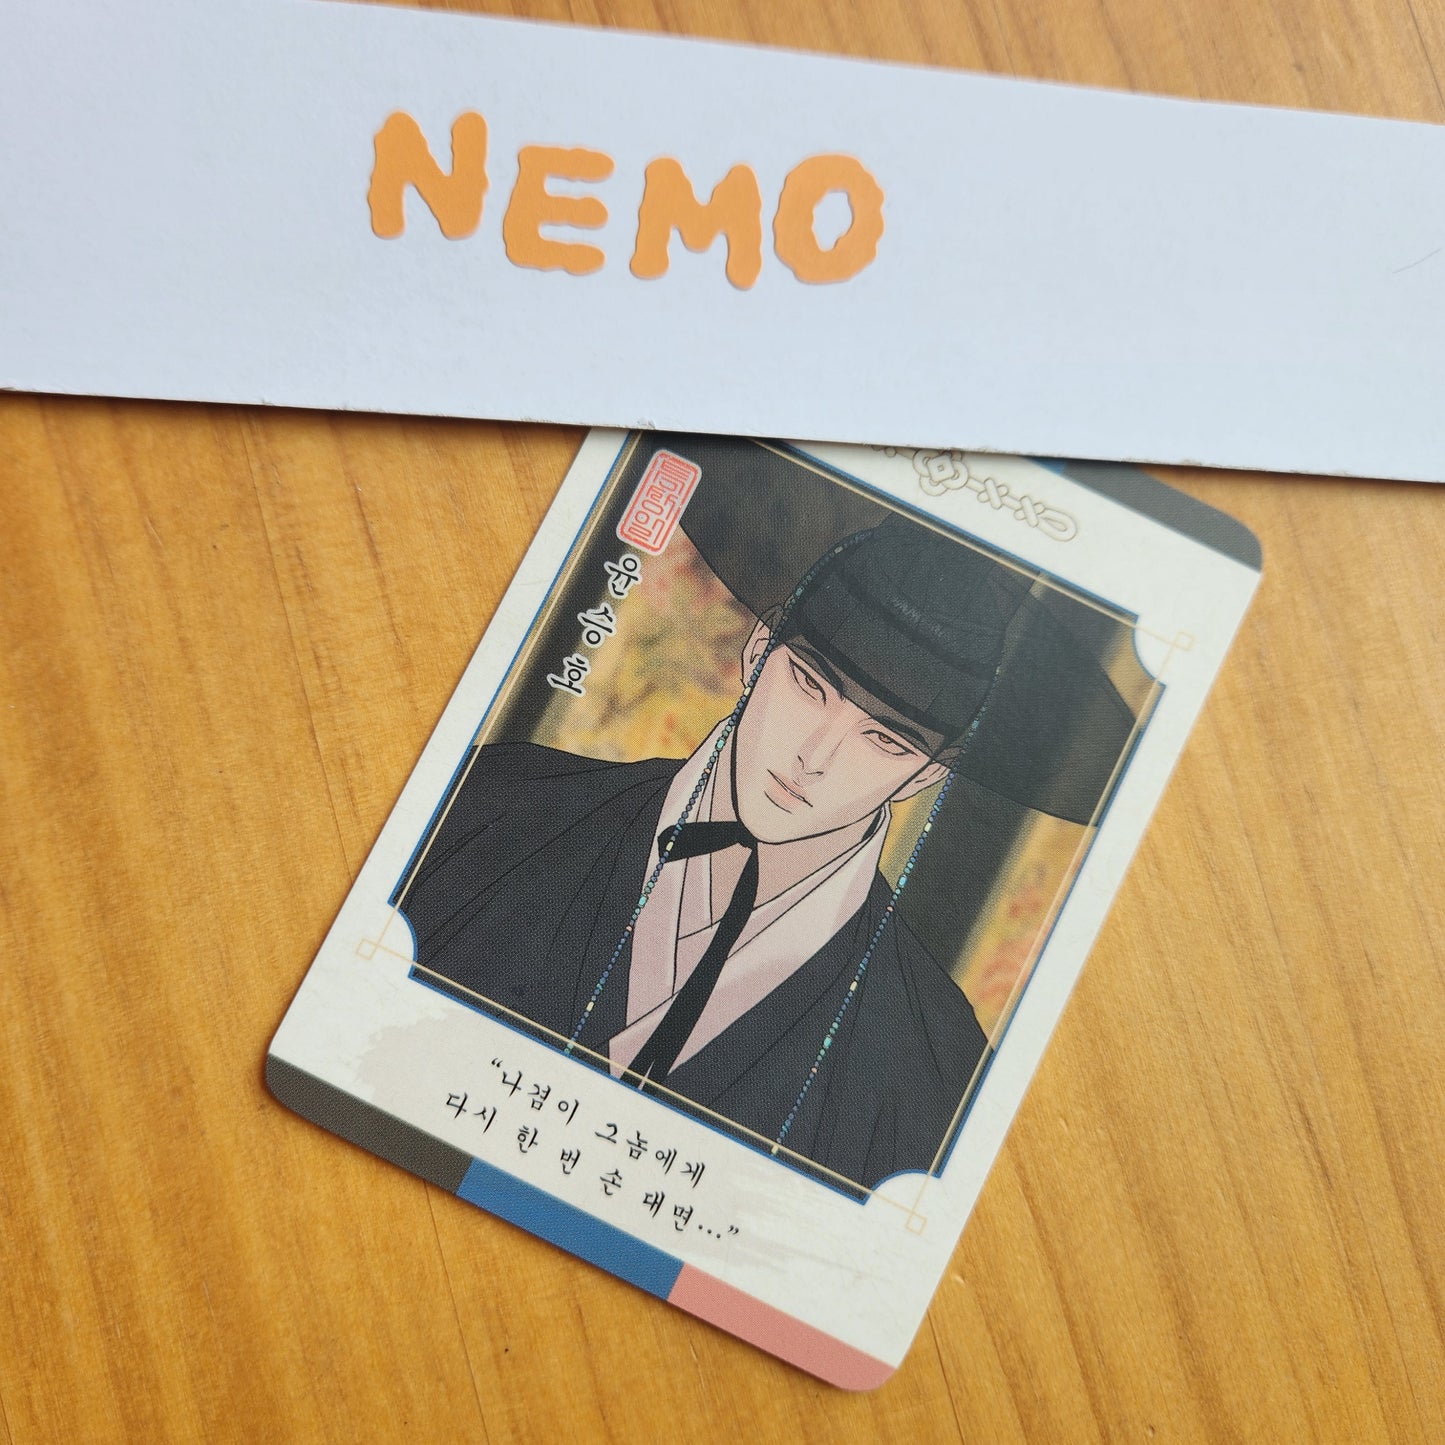 [6th NEMO MARKET] Painter of the Night Card - Seung ho